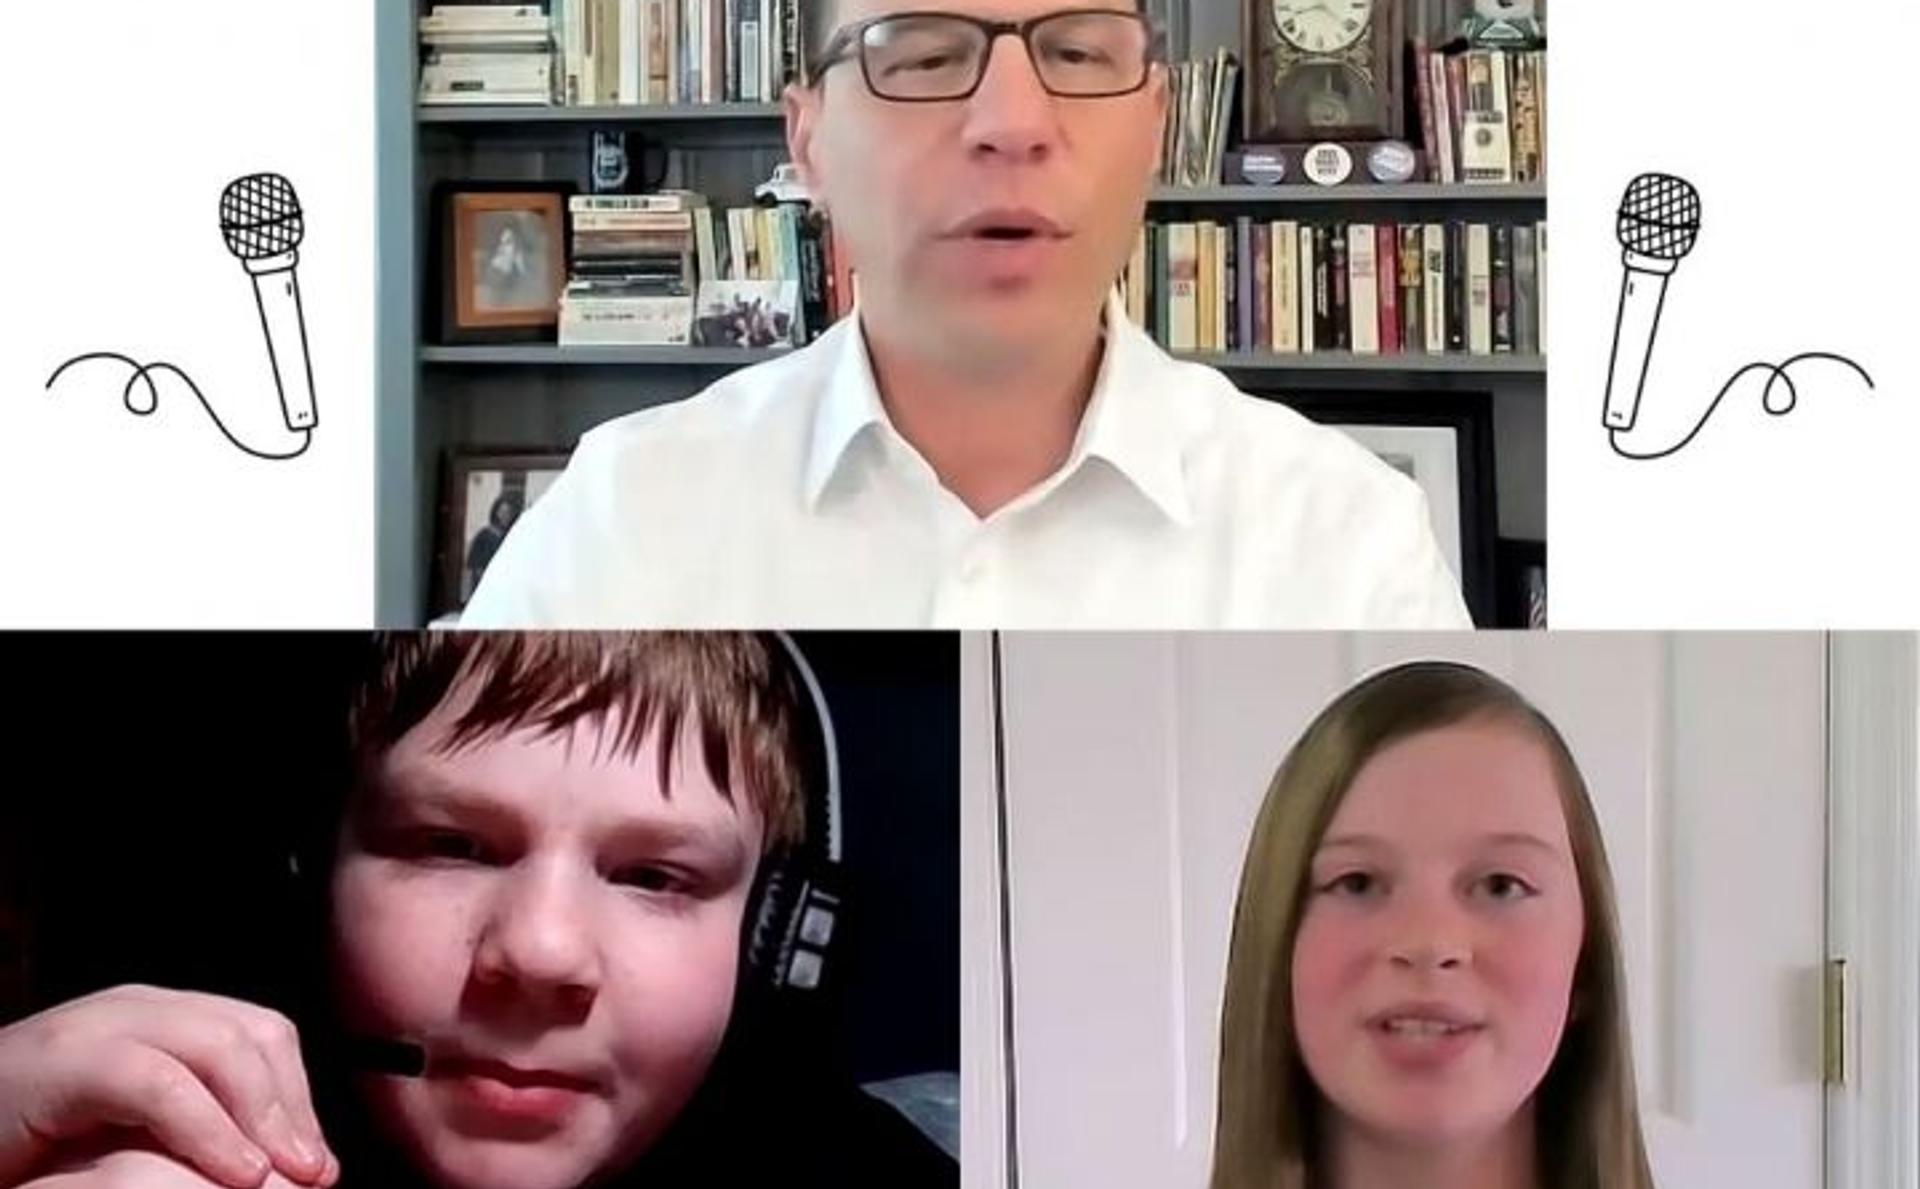 A screen capture of the online town hall showing students Carter and Georgia with Governor Shapiro. Each person is tuning in from their own computers.